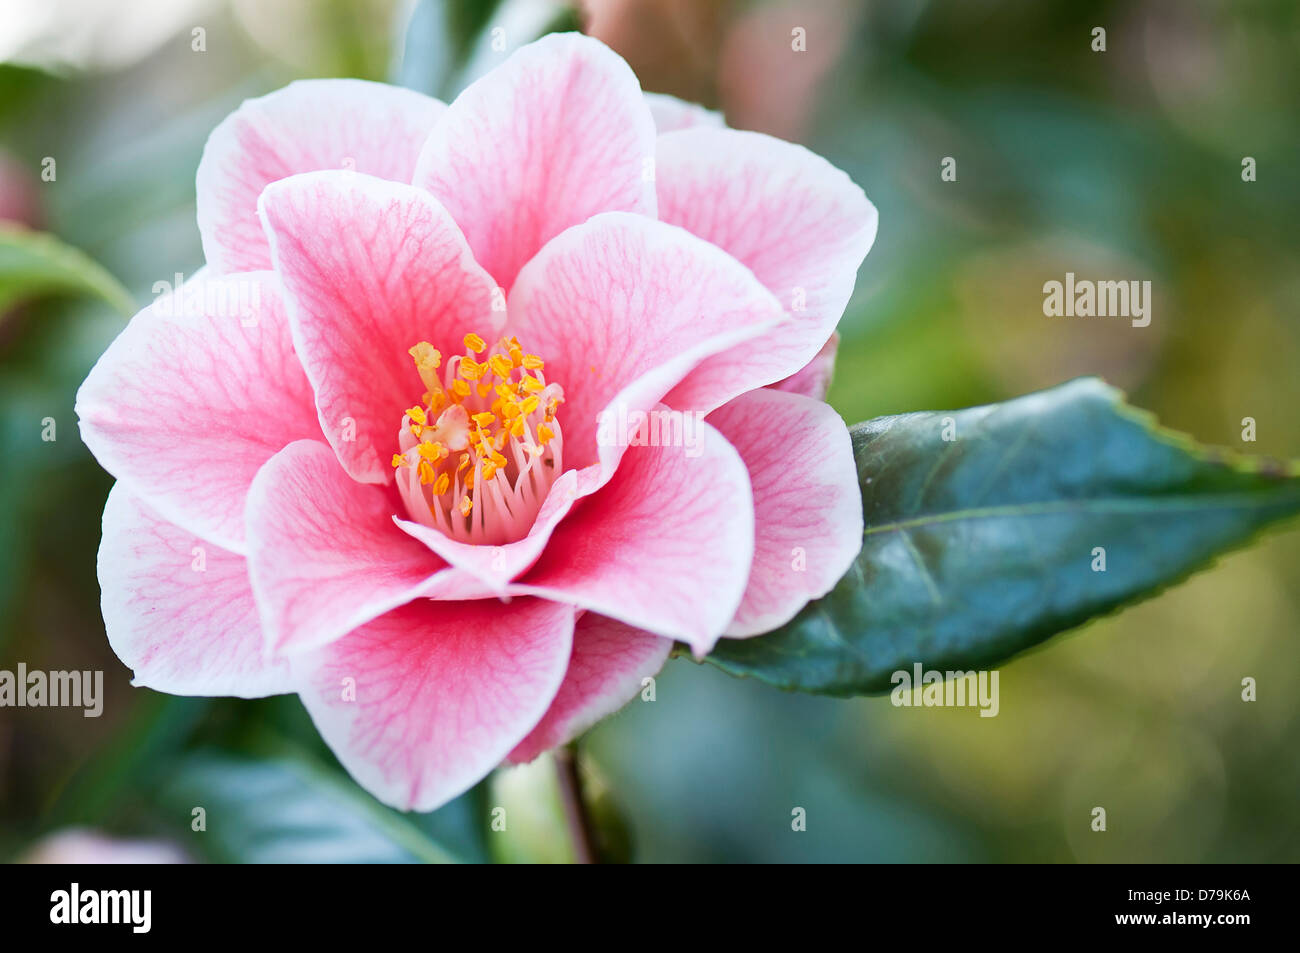 Single pink flower of Camelia japonica 'Yours Truly' with delicate veining extending over petals and yellow stamen in centre. Stock Photo